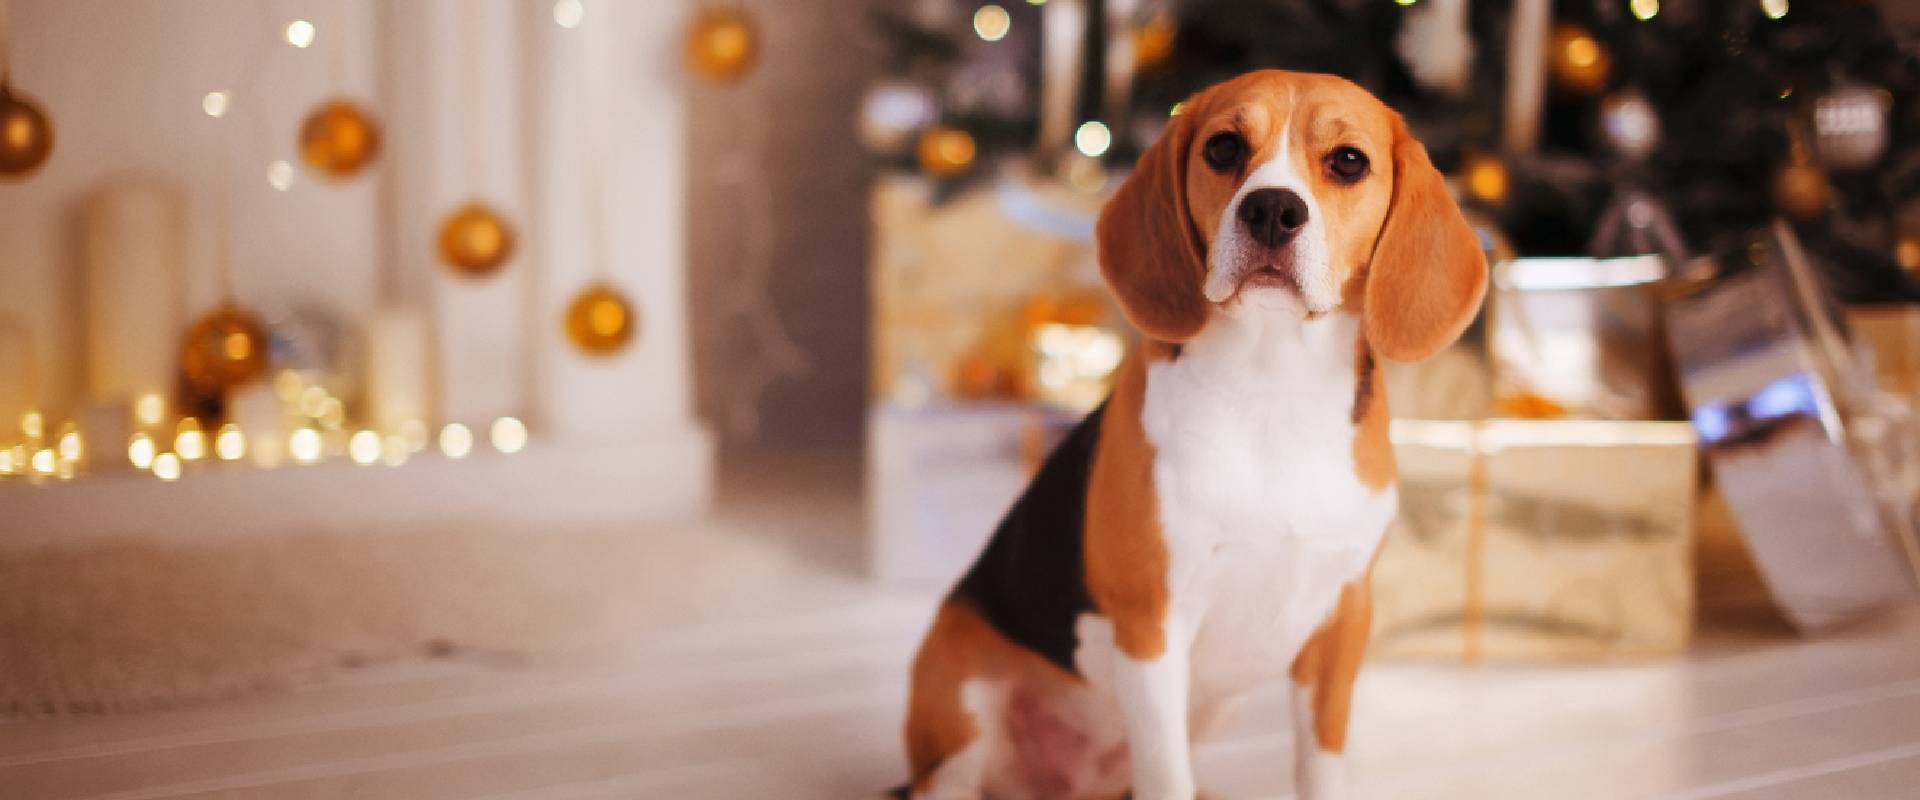 Beagle sitting in front of a festive background